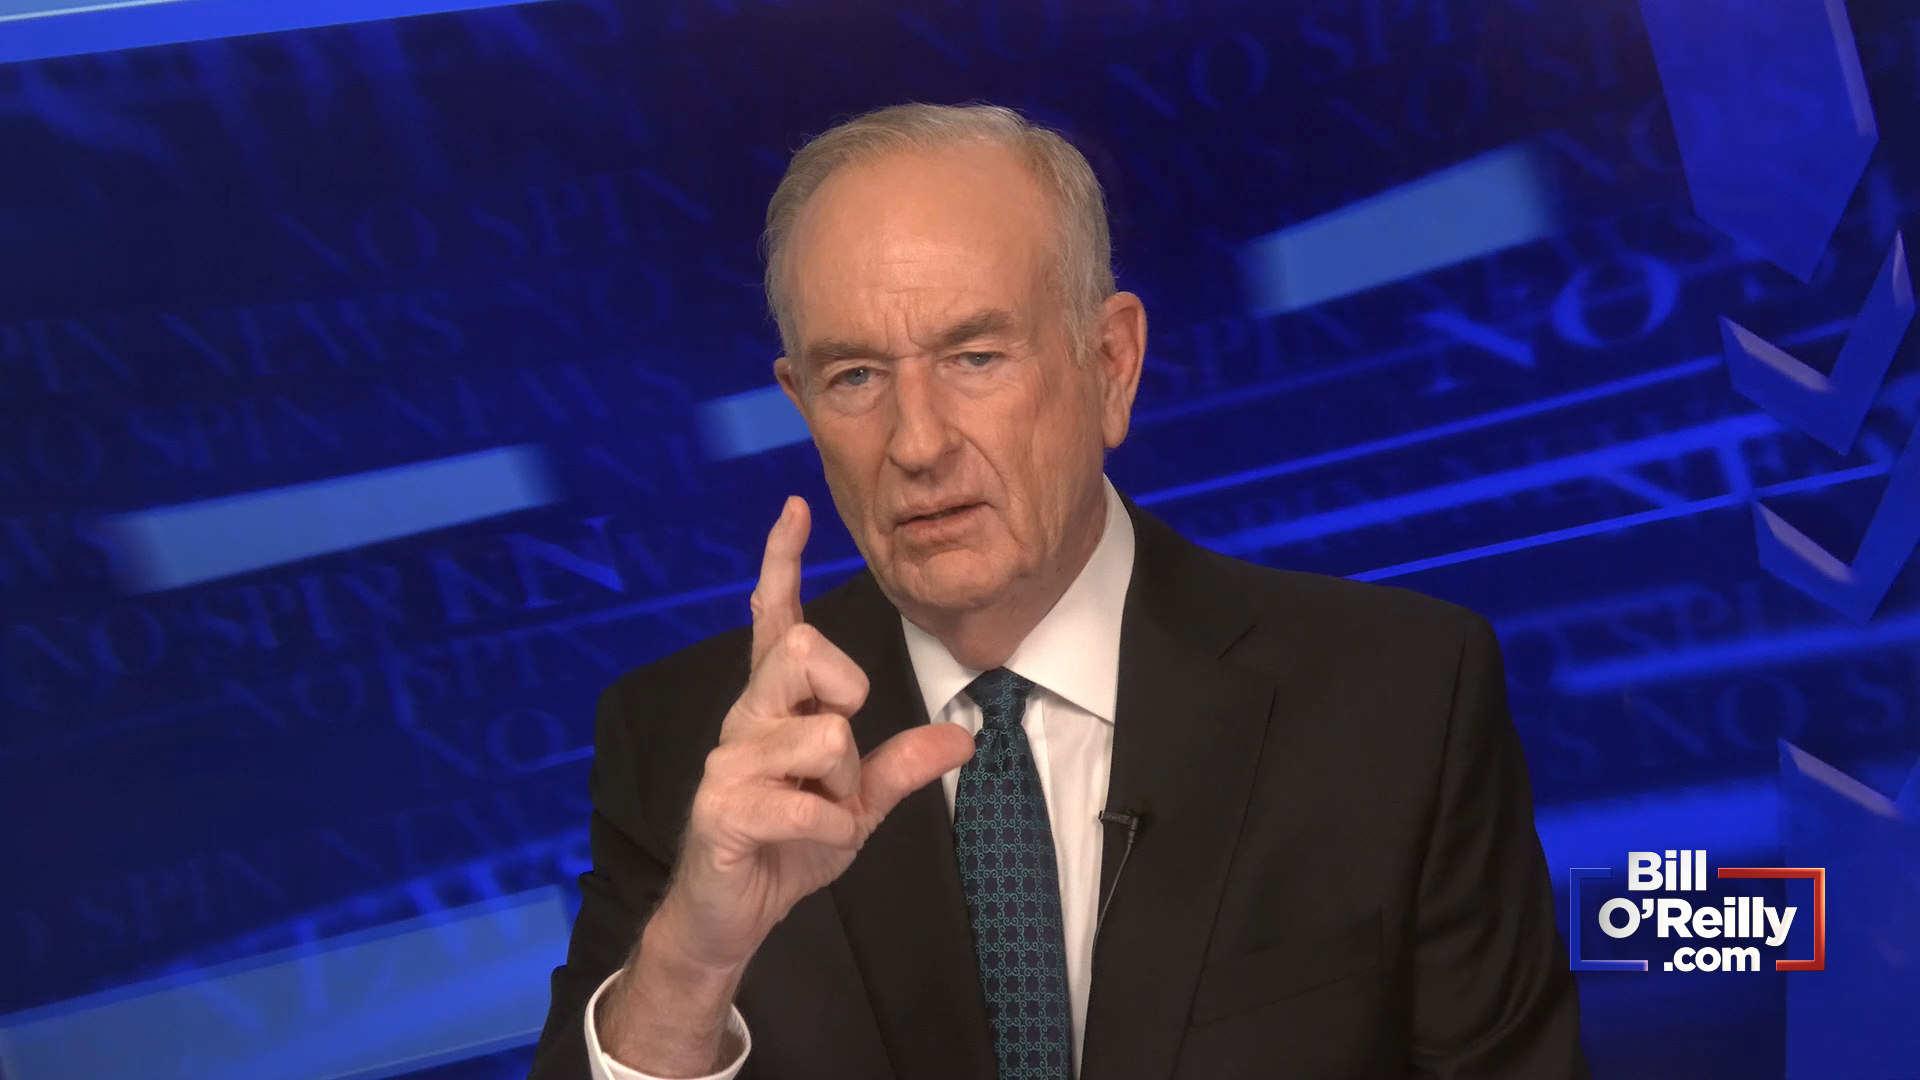 O'Reilly: How Much More Evidence Do You Need to Say the DOJ is a Corrupt Entity?